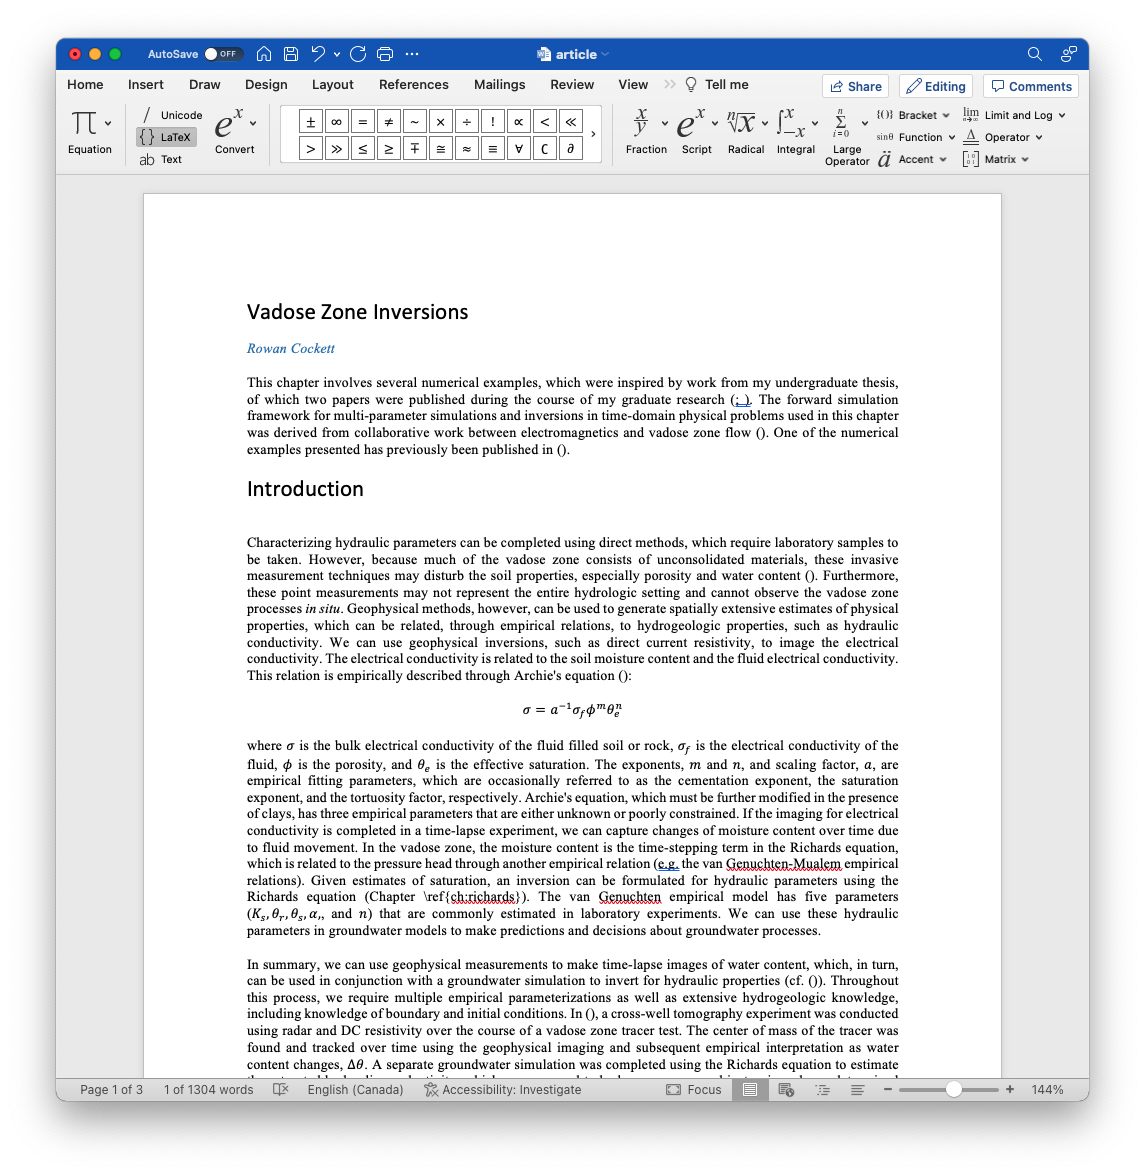 Export to a Microsoft Word document to easily share with your colleagues.